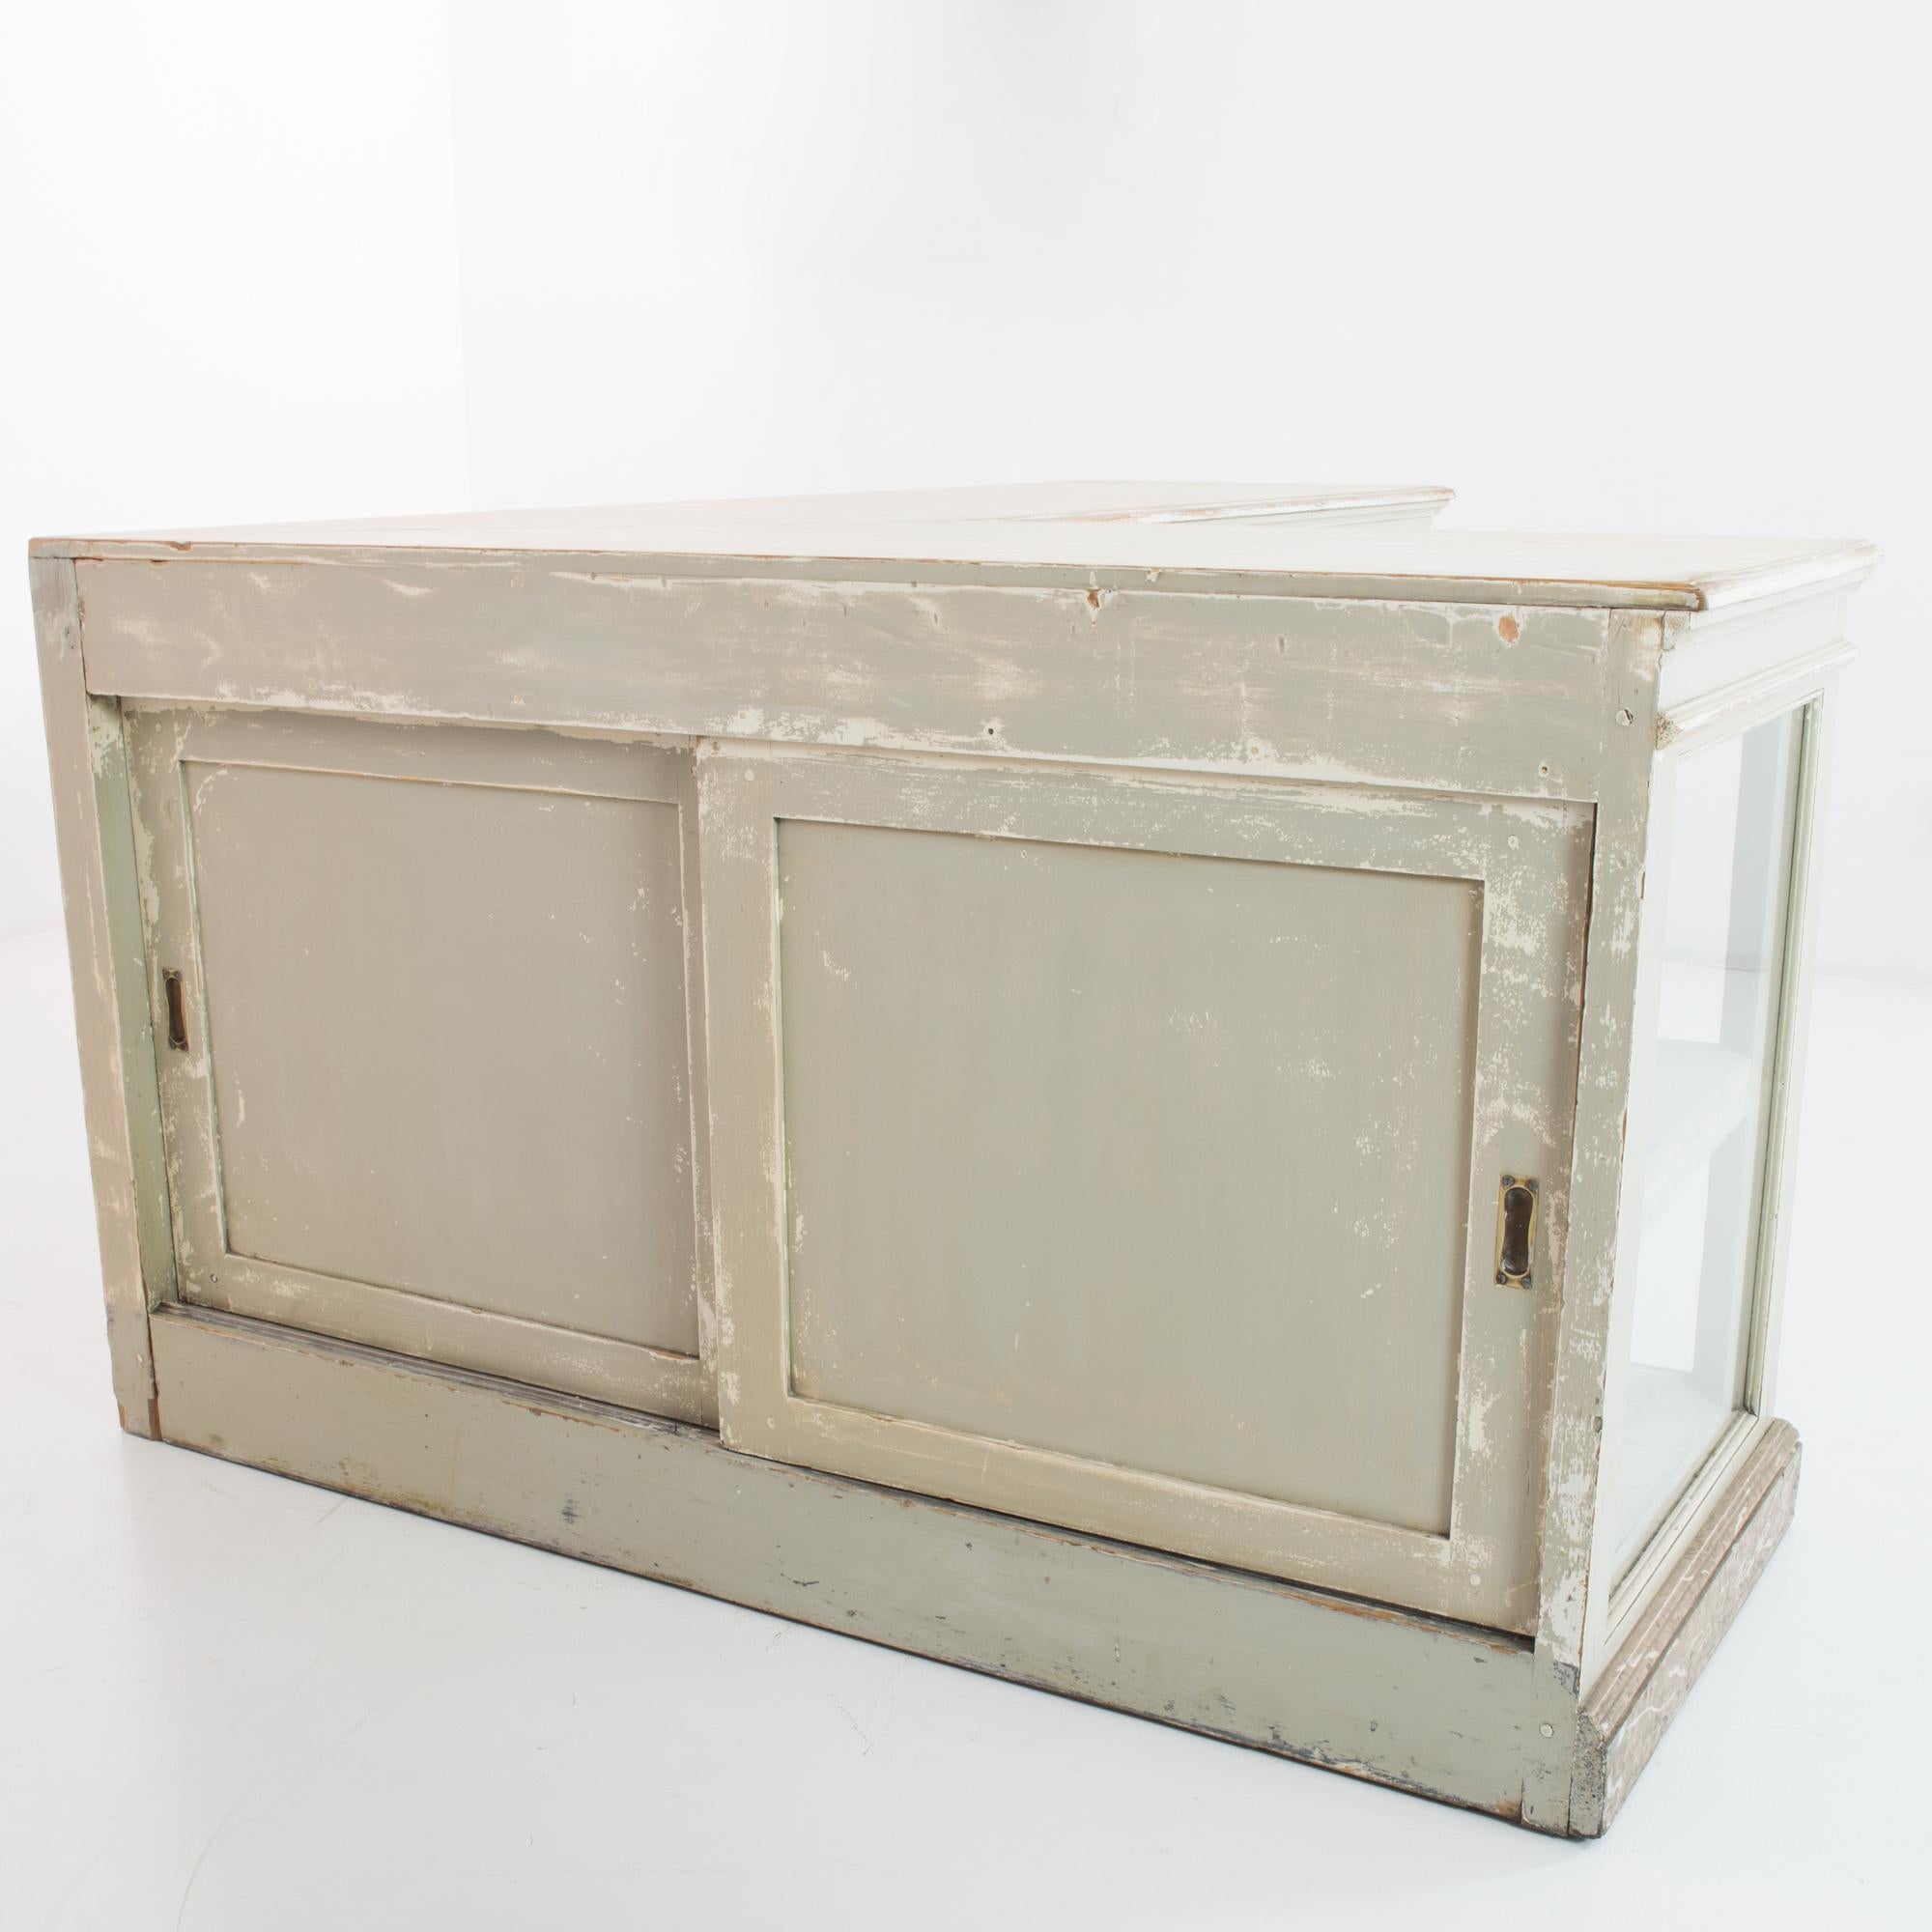 An L-shaped wooden shop counter from France, circa 1910, with a nostalgic patina. Glass windows on the front of the case allow a full view of the items on display; in the back, sliding doors provide access to the interior shelves. The front and